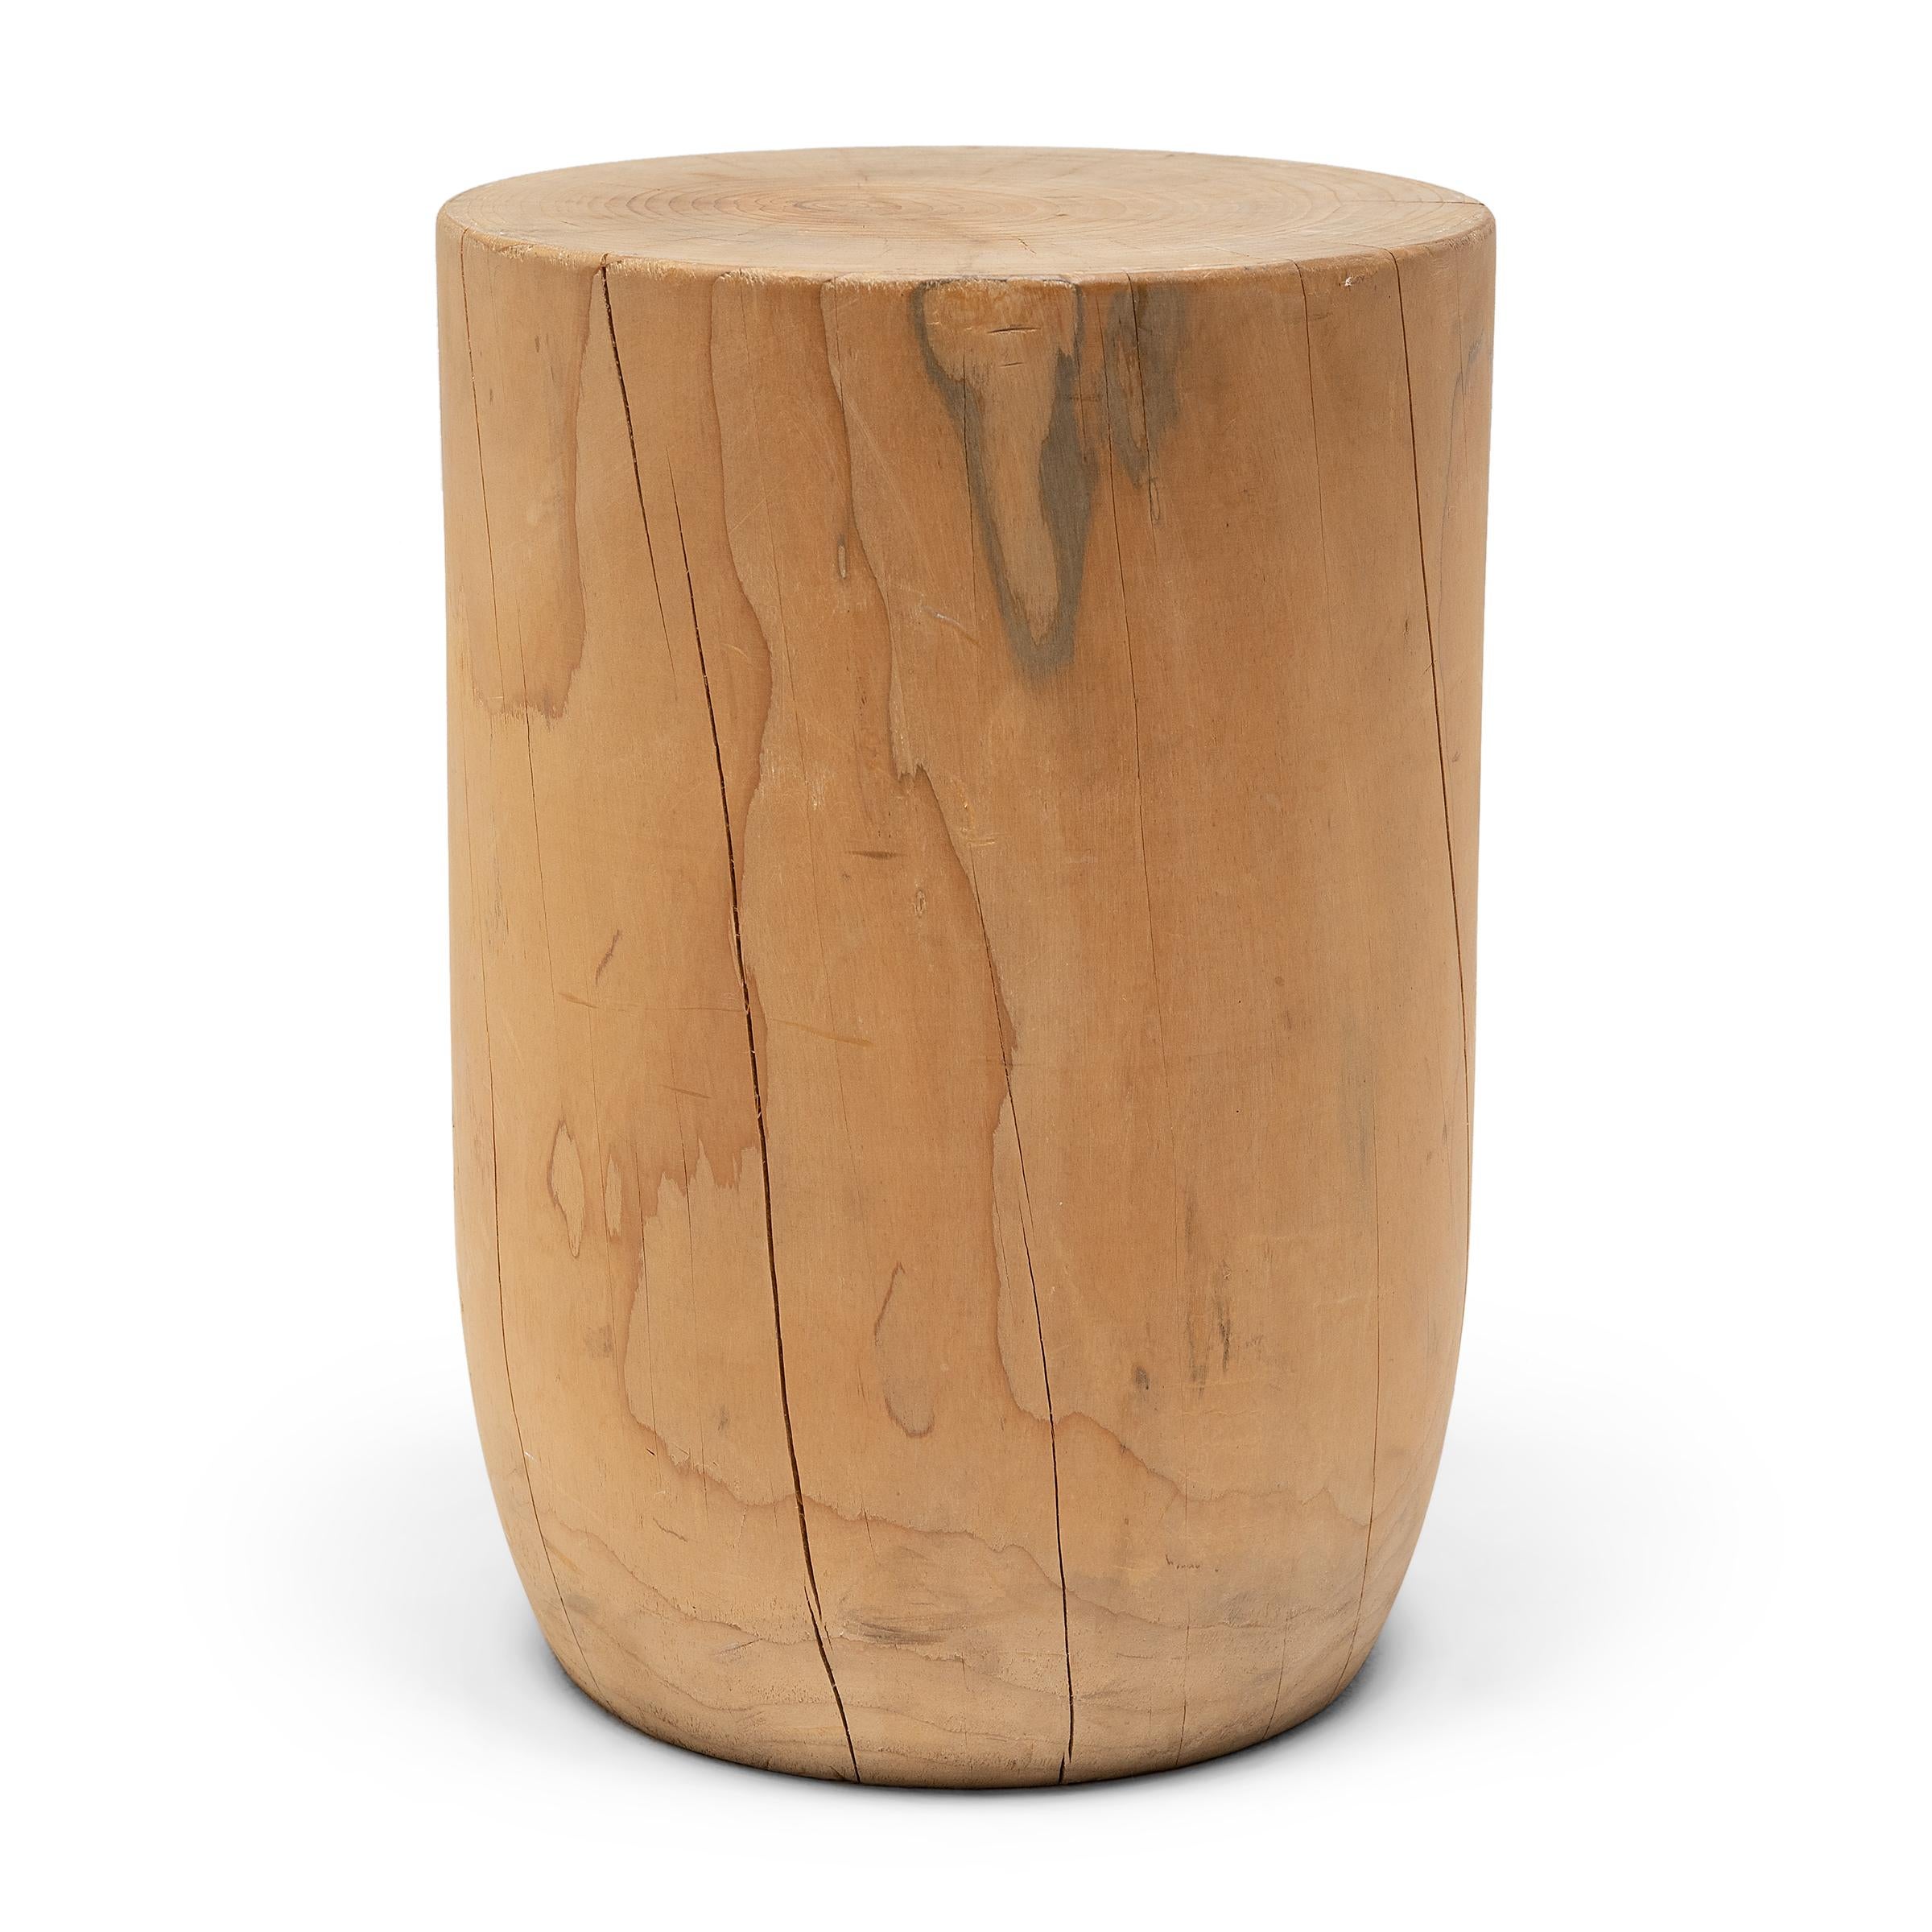 This modern side table was carved from a solid block of reclaimed wood and left unfinished to celebrate its natural blonde color and fantastic wood grain. The low trunk table boasts a minimalist design, sculpted with a flat top surface and a tapered